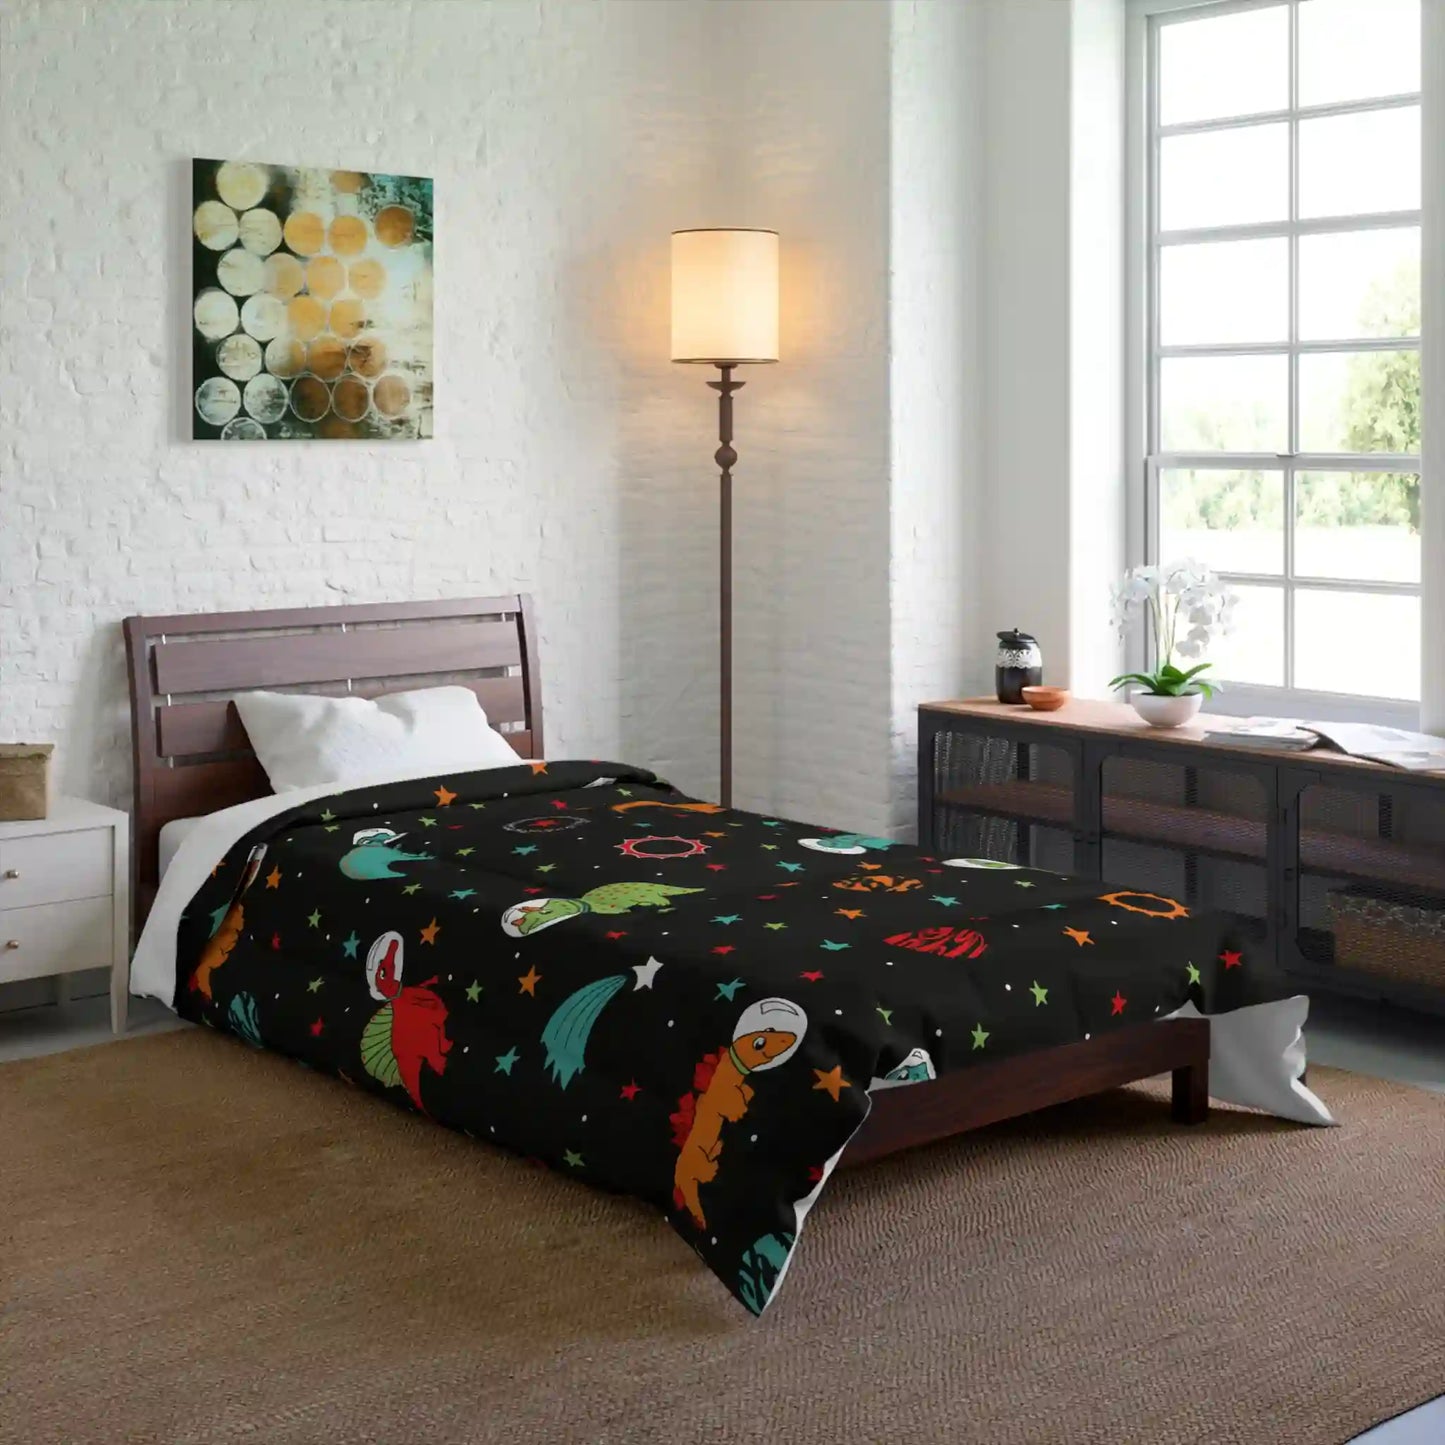 Comforter, quilting, laying, bed quilt (Dinosaurs)